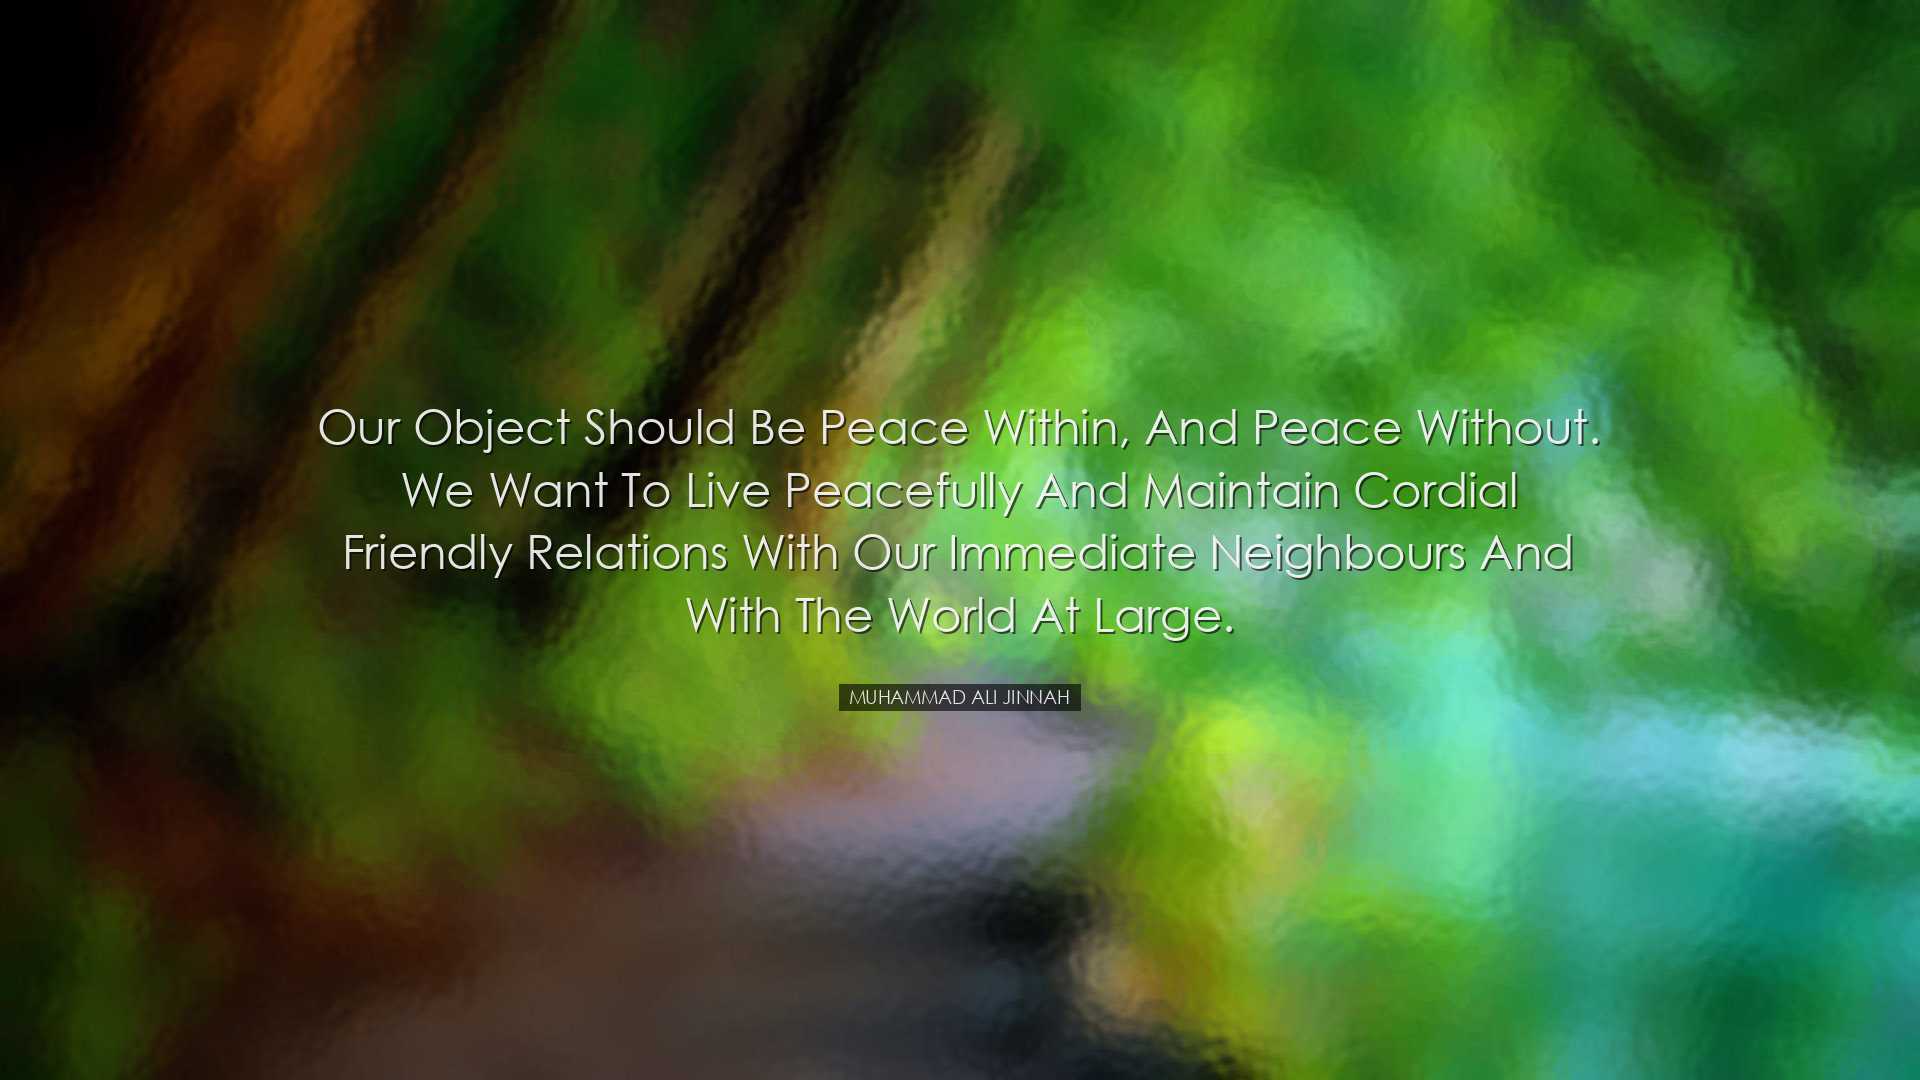 Our object should be peace within, and peace without. We want to l